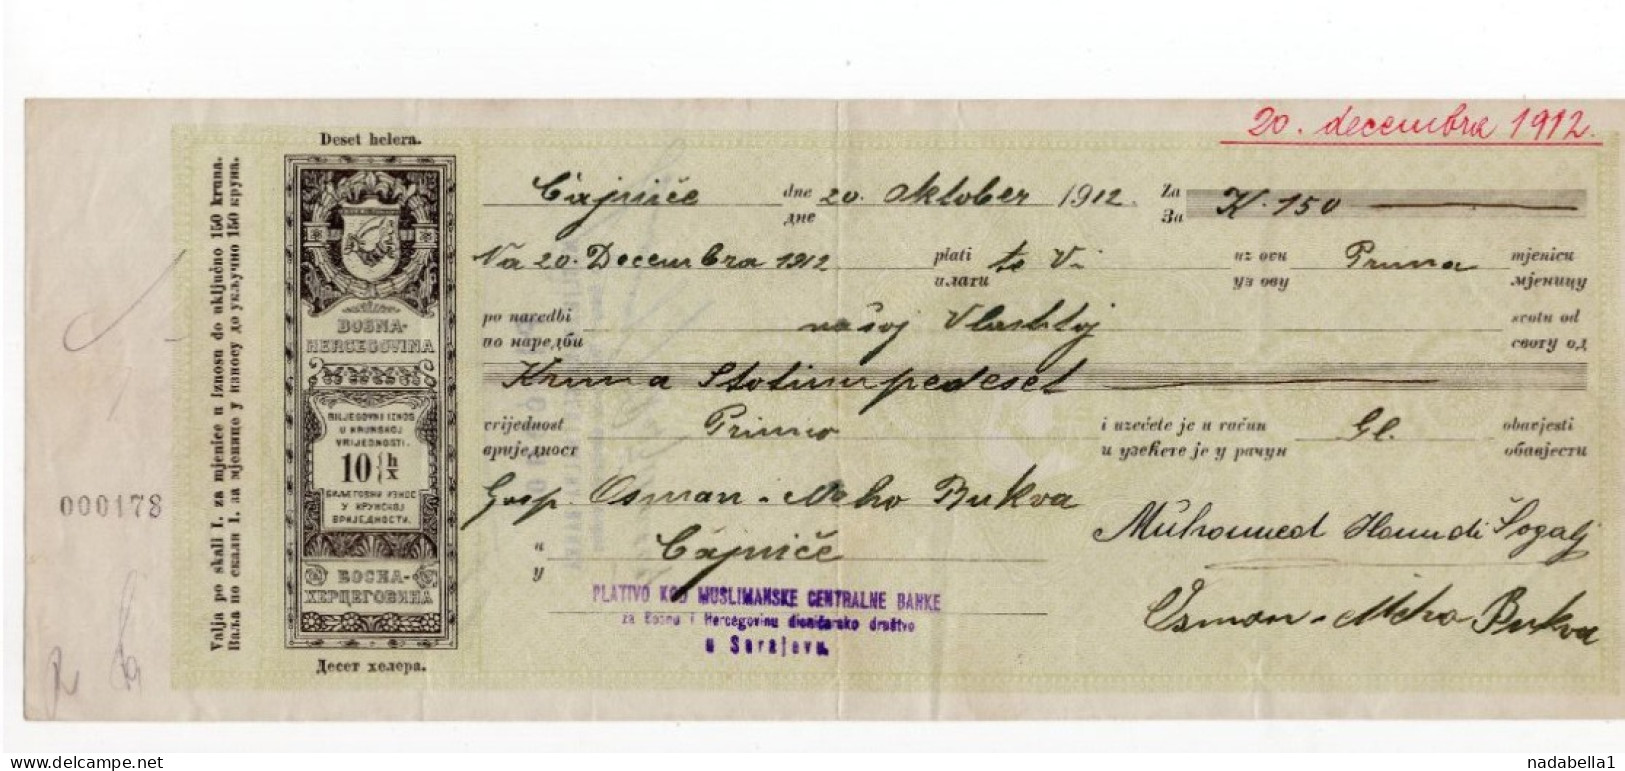 1912. BOSNIA,AUSTRIAN OCCUPATION,SARAJEVO,MUSLIM CENTRAL BANK,10 HELLER CHEQUE - Cheques & Traveler's Cheques